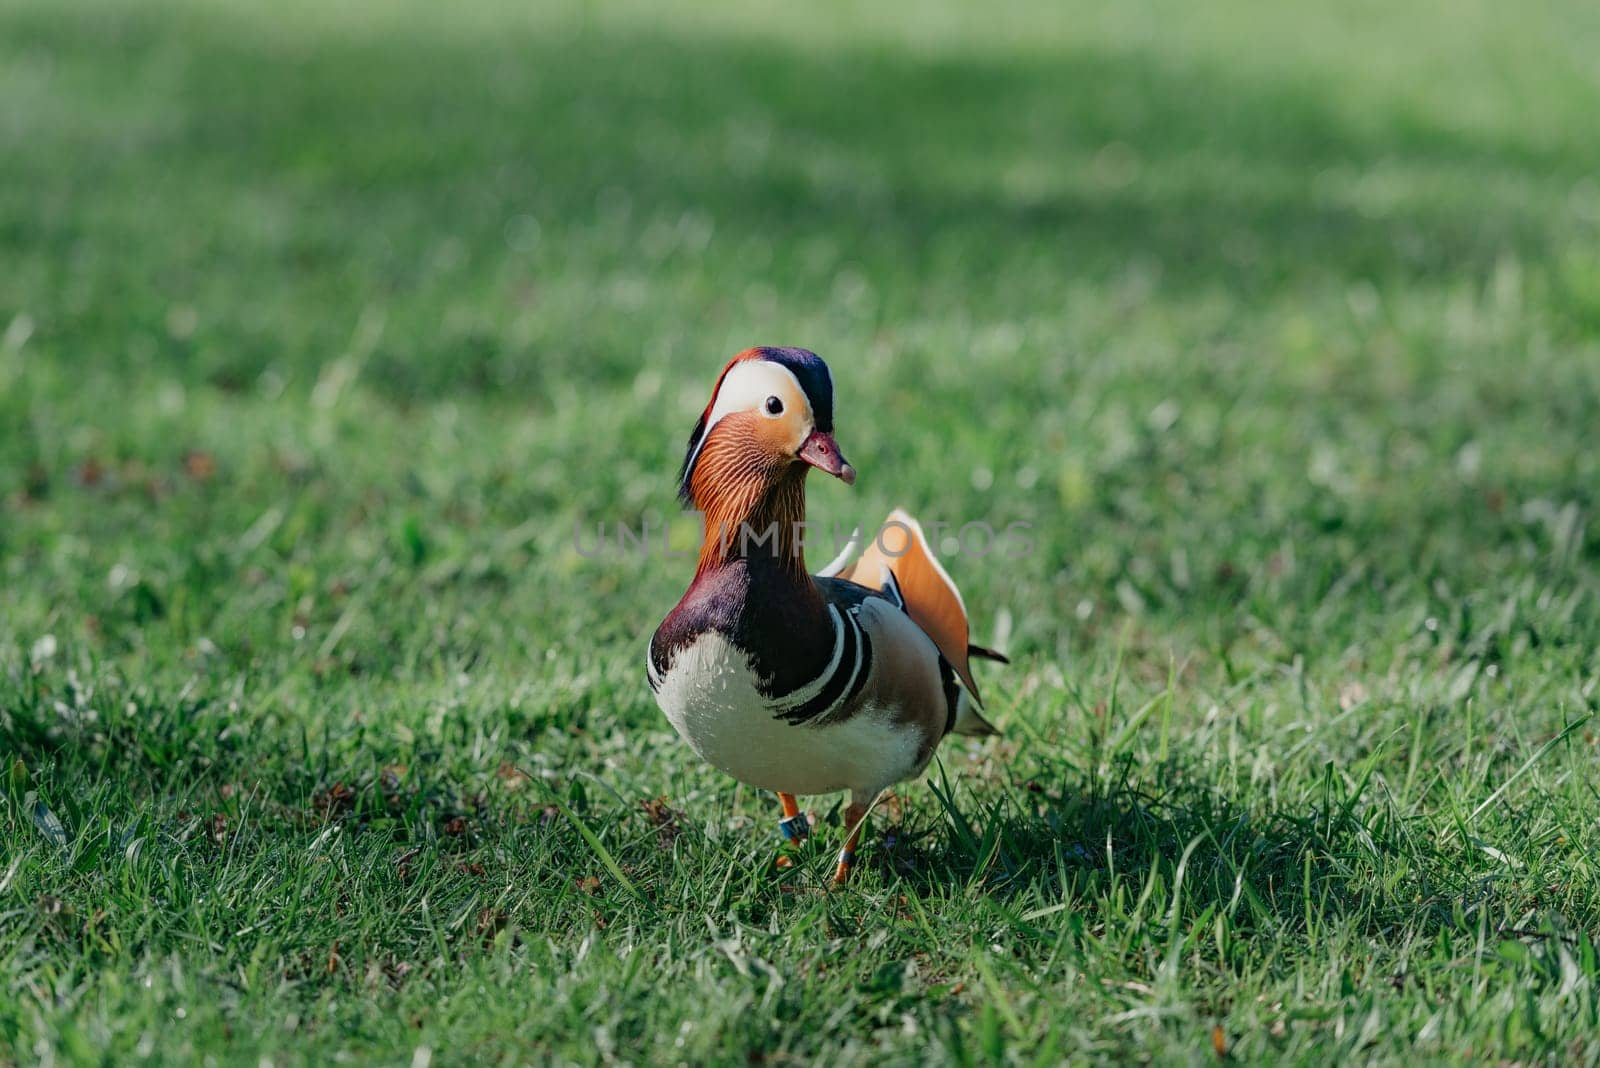 The mandarin duck walks through the meadow in the morning by RomanJRoyce